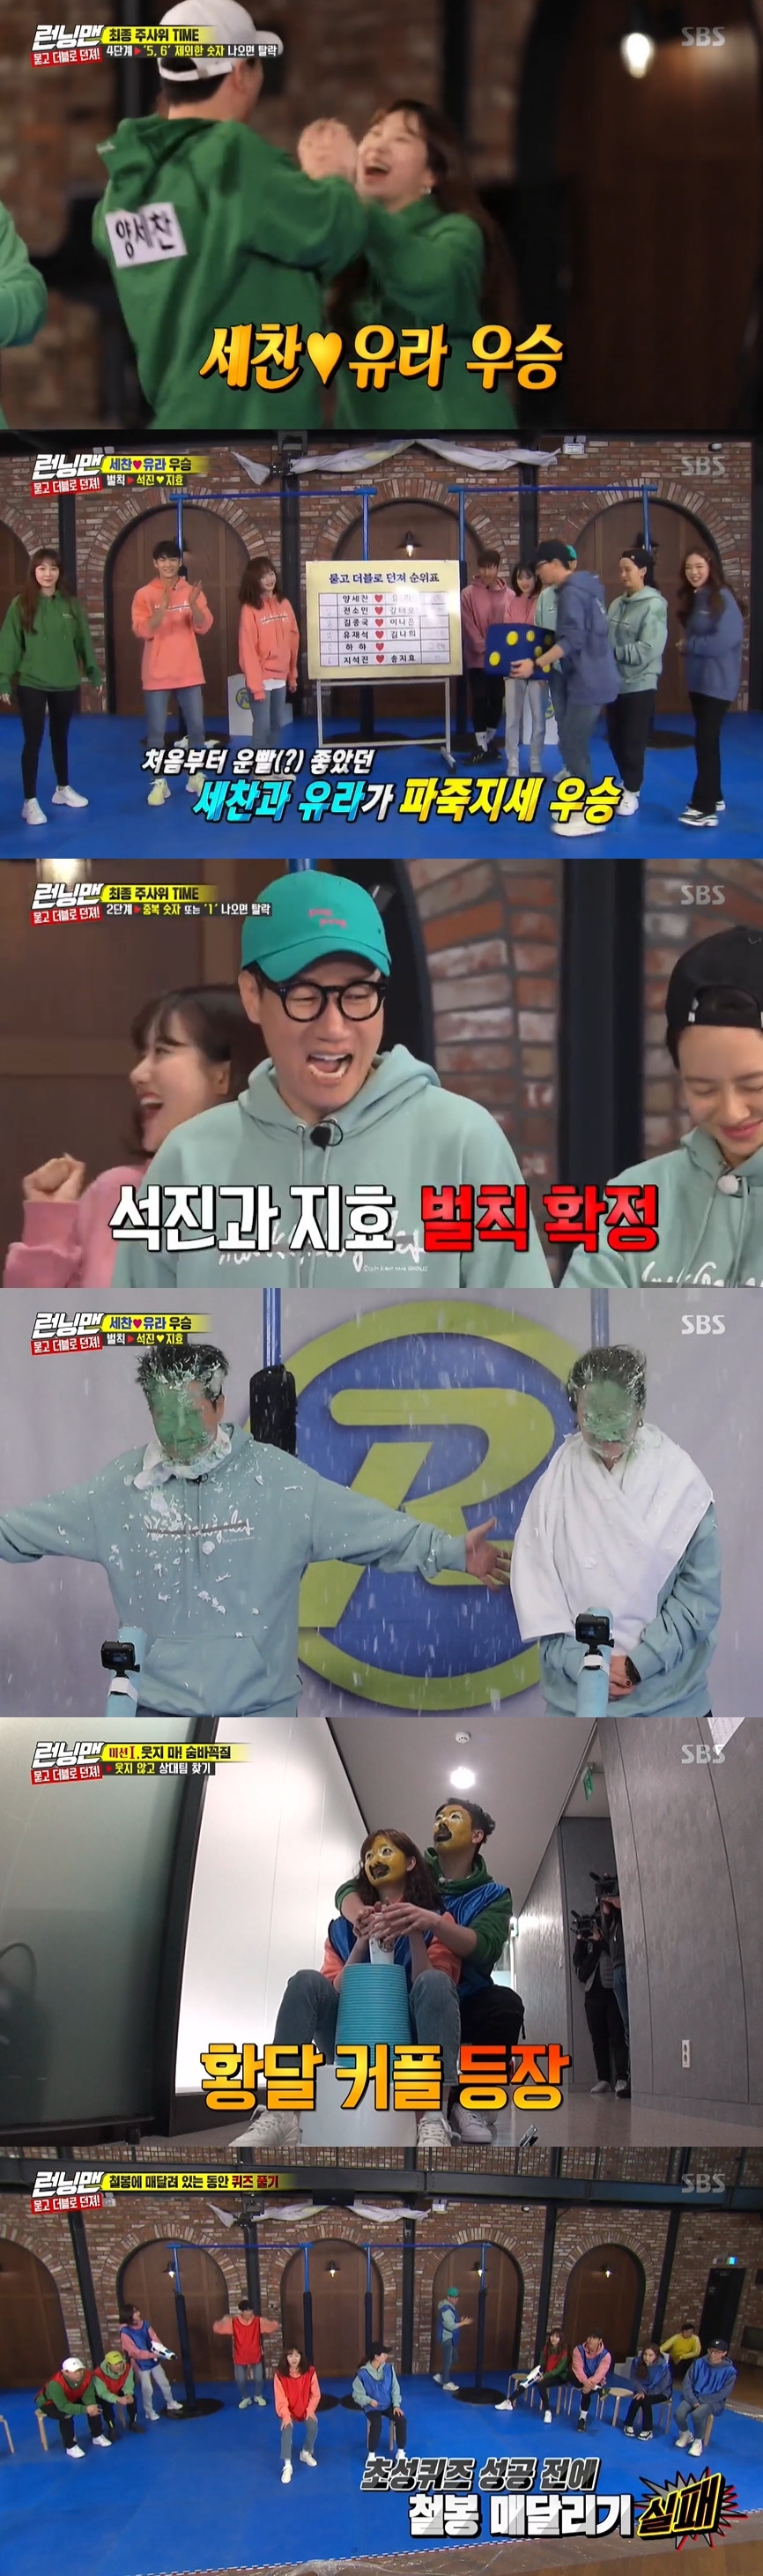 Seoul = = Yang Se-chan Yura team topped the dice game; Ji Suk-jin Song Ji-hyo confirmed bottom.SBS Running Man, which was broadcasted at 5 pm on the 8th, was featured as a special feature of Tossing to Double Jeopardy, and Girls Day Yura, April Na-eun, singer Nahee and actor Kang Tae-oh appeared as guests.Im resting these days, Im developing myself, Im studying a little bit of English, said Yura, who made the days guest appearance.It was composed of Ji Hyo Seokjin, Park Jae-seok Nahee, Sechan Yura, Somin Taeo, Finally Na-eun, and Solo Haha.Couples with the highest amount and few couples will receive prize money and penalties, respectively.Blue team Sechan Yura, Somin Taeo, and Na-eun eventually went into the makeup to defend, and RED team Ji Hyo Seokjin, Park Jae-seok Nahee and Haha went out to find the opponent team without laughing.Jeon So-min and Yang Se-chan transformed into a jaundice couple and parodied the scenes in line with the movie Love and Soul OST, laughing at everyone, and eventually the RED team succeeded in touching a total of two people.The RED team also went on defense.Haha ran as an avatar makeup, and Ji Suk-jin and Song Ji-hyo showed off the challenge to Zicos No Song with a no-deal.In addition, Yoo Jae-Suk dressed up as a llama and laughed with a freestyle Y song; however, Kim Jong-guk and Na-eun succeeded in touching all without laughing, and the Blue team won.As a result of the first round, Sechan Yura was the first, and Seokjin Jihyo and Haha became bottom.The second mission was to throw a card on the menu, to get food, and to enjoy lunch together, and then to the last time, while hanging on the iron bar, to the mission of solving the quiz.The words must be spoken in the Korean and alphabets, respectively; Ji Suk-jin failed to cling to the iron bars, so the RED team first got one point.Yang Se-chan won three points and won 20,000 won each prize money by overcoming Yoo Jae-Suks obstruction.The last dice time was followed by the first prize Hanwoo set, with a total of 150,000 won for Sechan Yura, 70,000 won for Somin Taeo, and 50,000 won for Na-eun in China.However, Park Jae-seok Nahee was eliminated from both teams due to the overlapping number with Sechan Yura, Sechan Yura was 140,000 won, and Park Jae-seok Nahee was 40,000 won.Haha was 30,000 won, and Seokjin Jihyo was the top model in the third stage, but failed and confirmed the bottom.Jeon So-min and Kang Tae-oh failed to top Model in the upset, but eventually Yang Se-chan and Yura won the final.In addition, Jung Chul-min PD left Running Man after the broadcast.Meanwhile, Running Man is broadcast every Sunday at 5 pm.